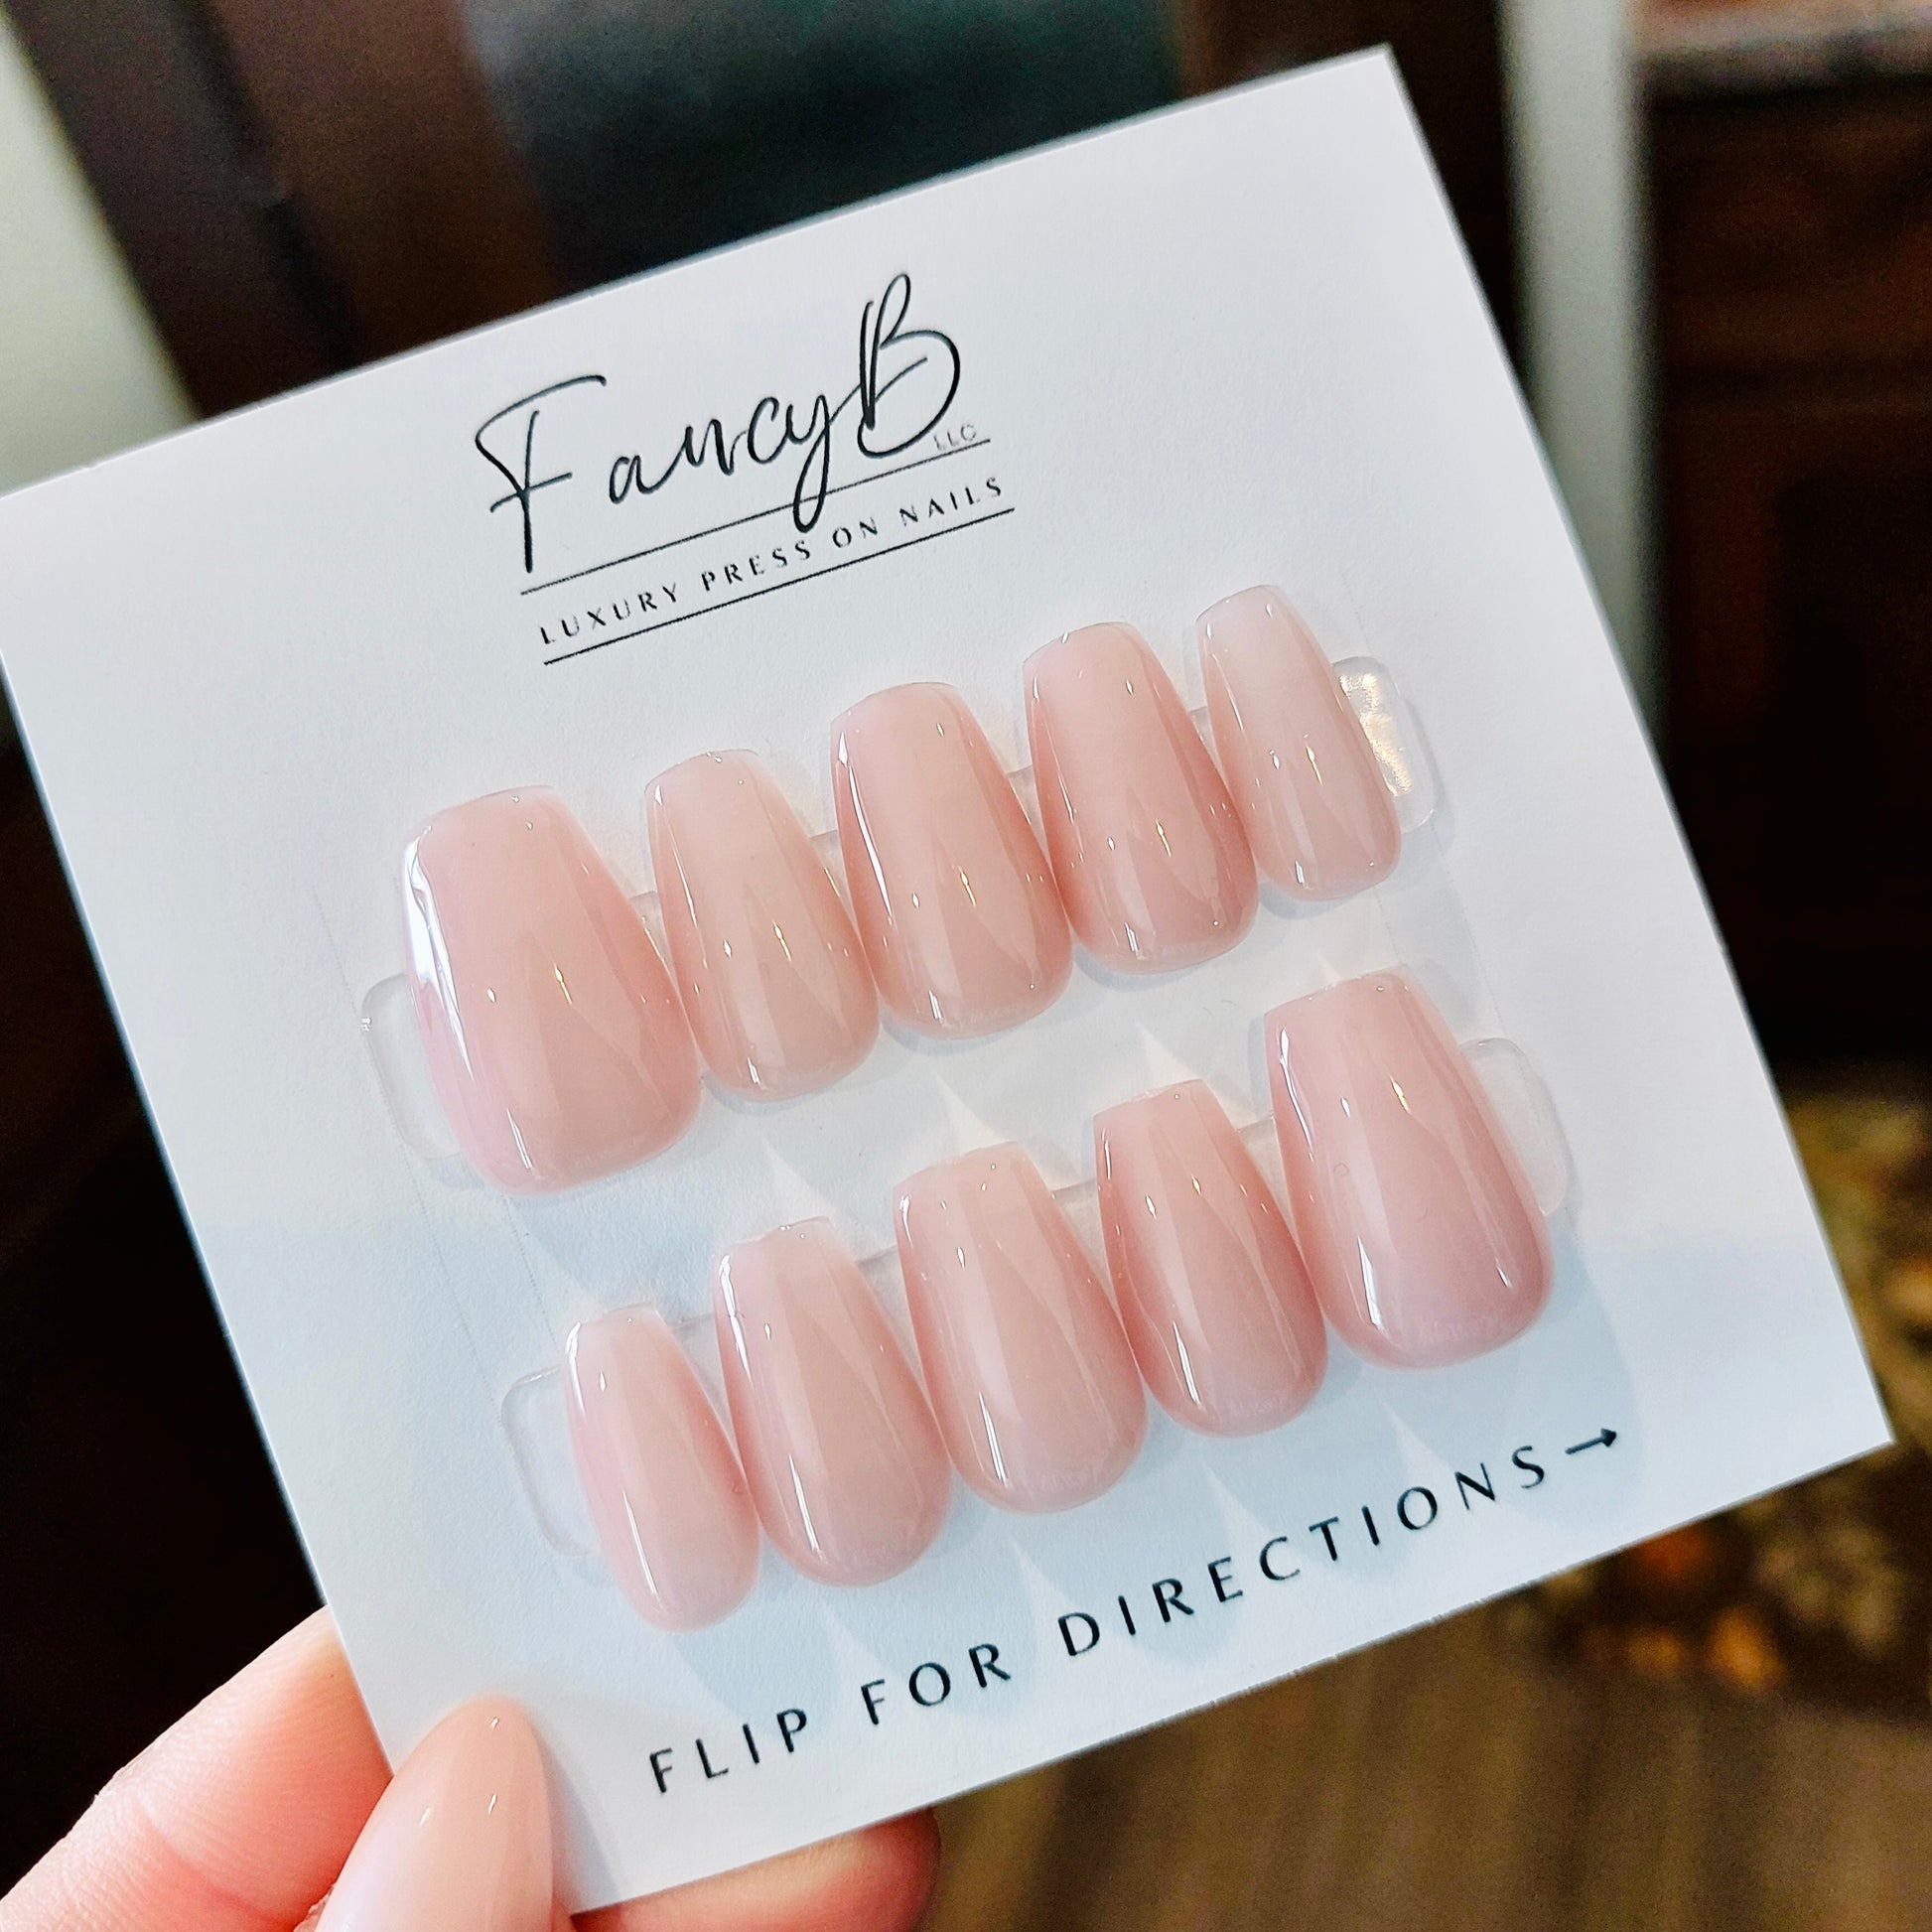 Simple soft pink jelly press on nails perfect for business attire, casual every day, or special occasions like weddings or date night. Ultra Glossy finish giving them a glass appearance.